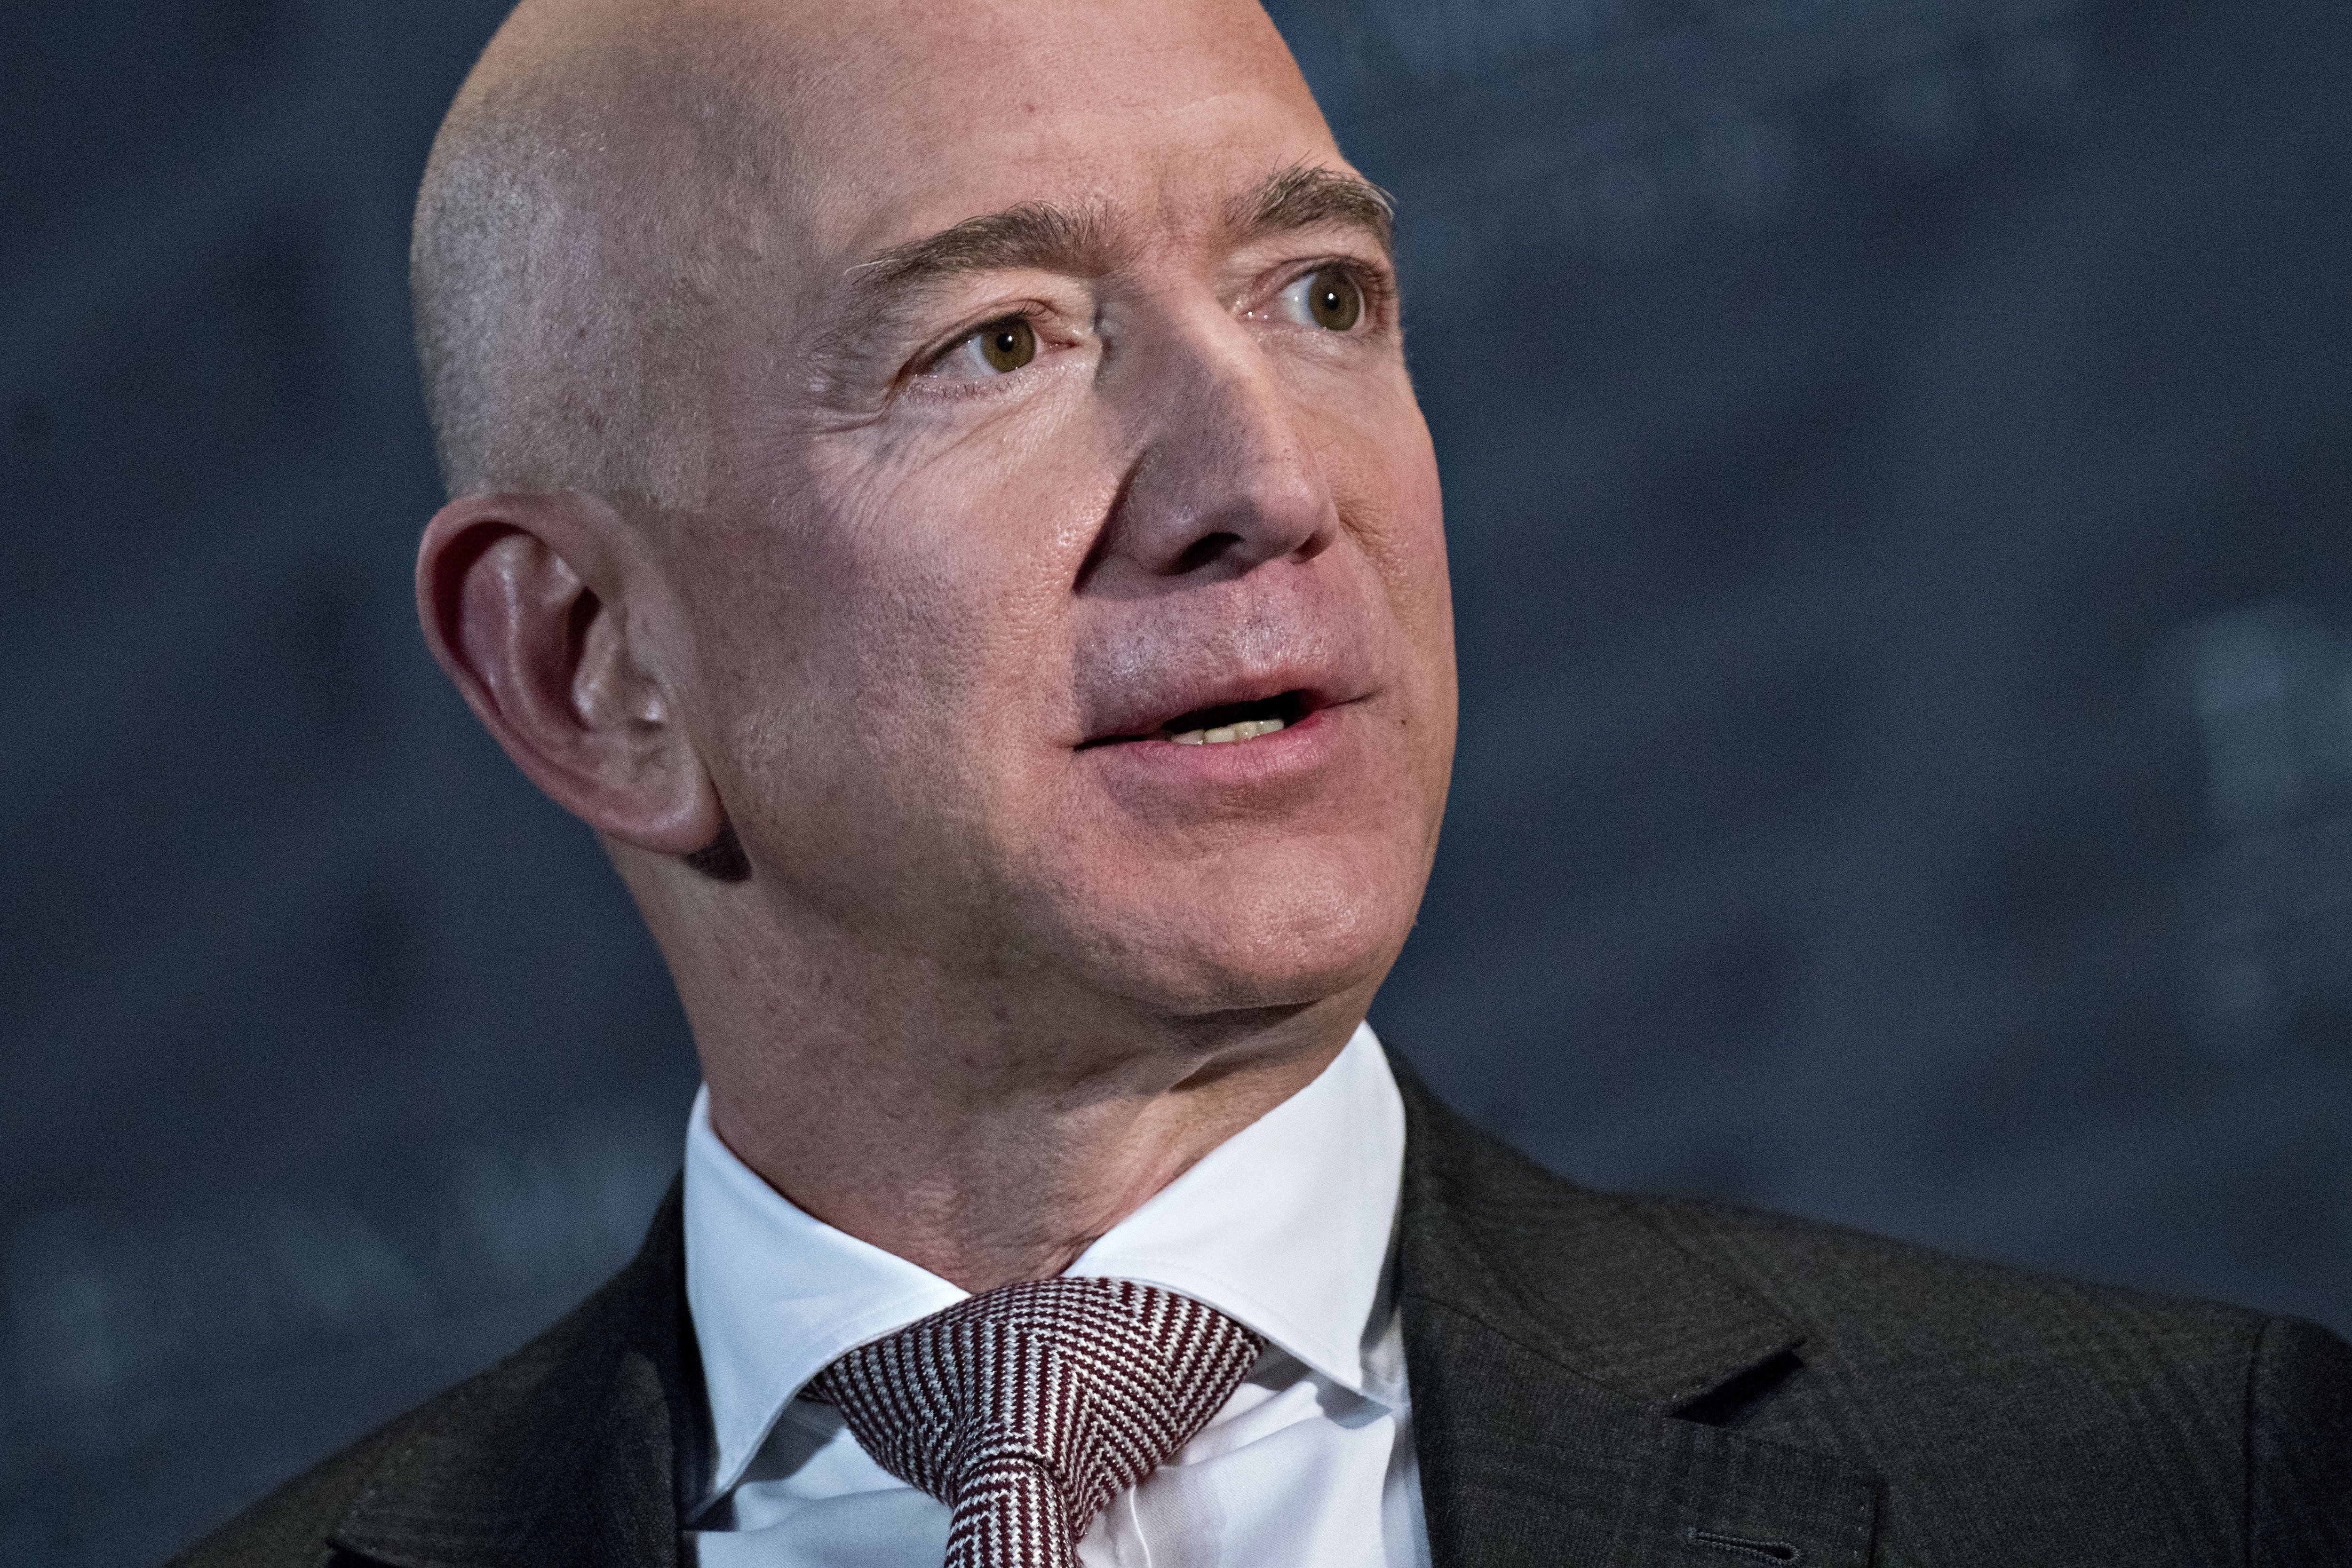 Jeff Bezos, founder and chief executive officer of Amazon.com, is the wealthiest person on Earth. Photo: Bloomberg